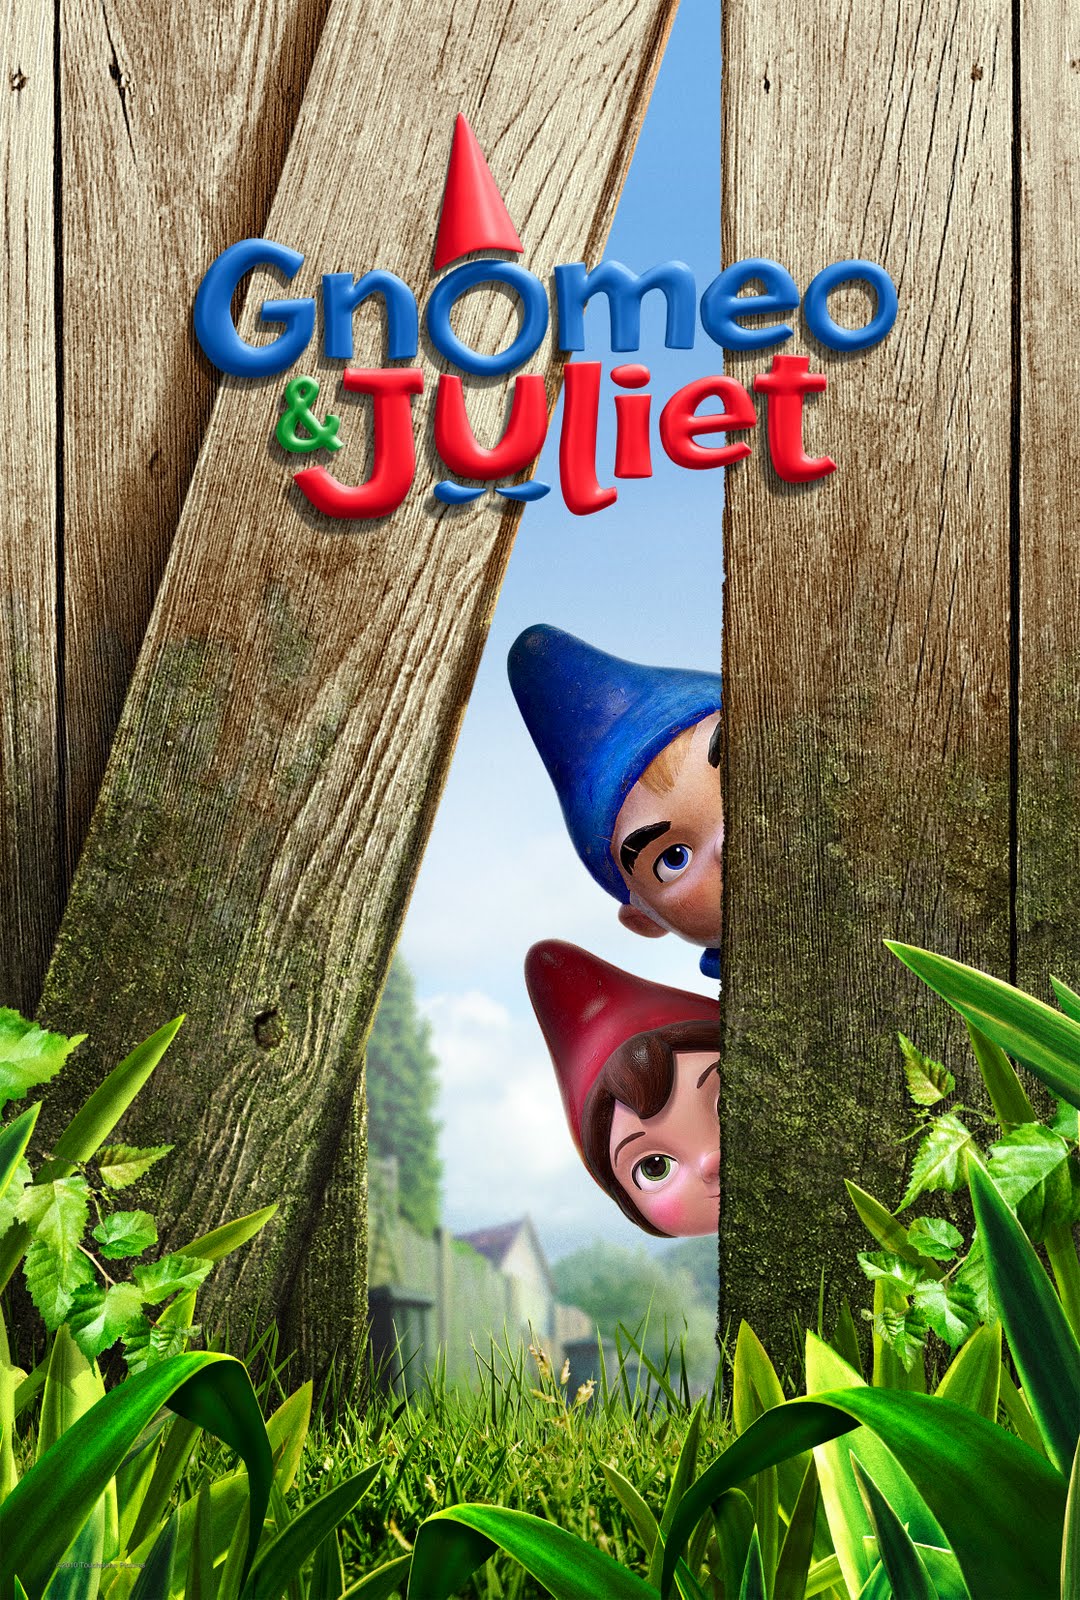 Nice Images Collection: Gnomeo & Juliet Desktop Wallpapers